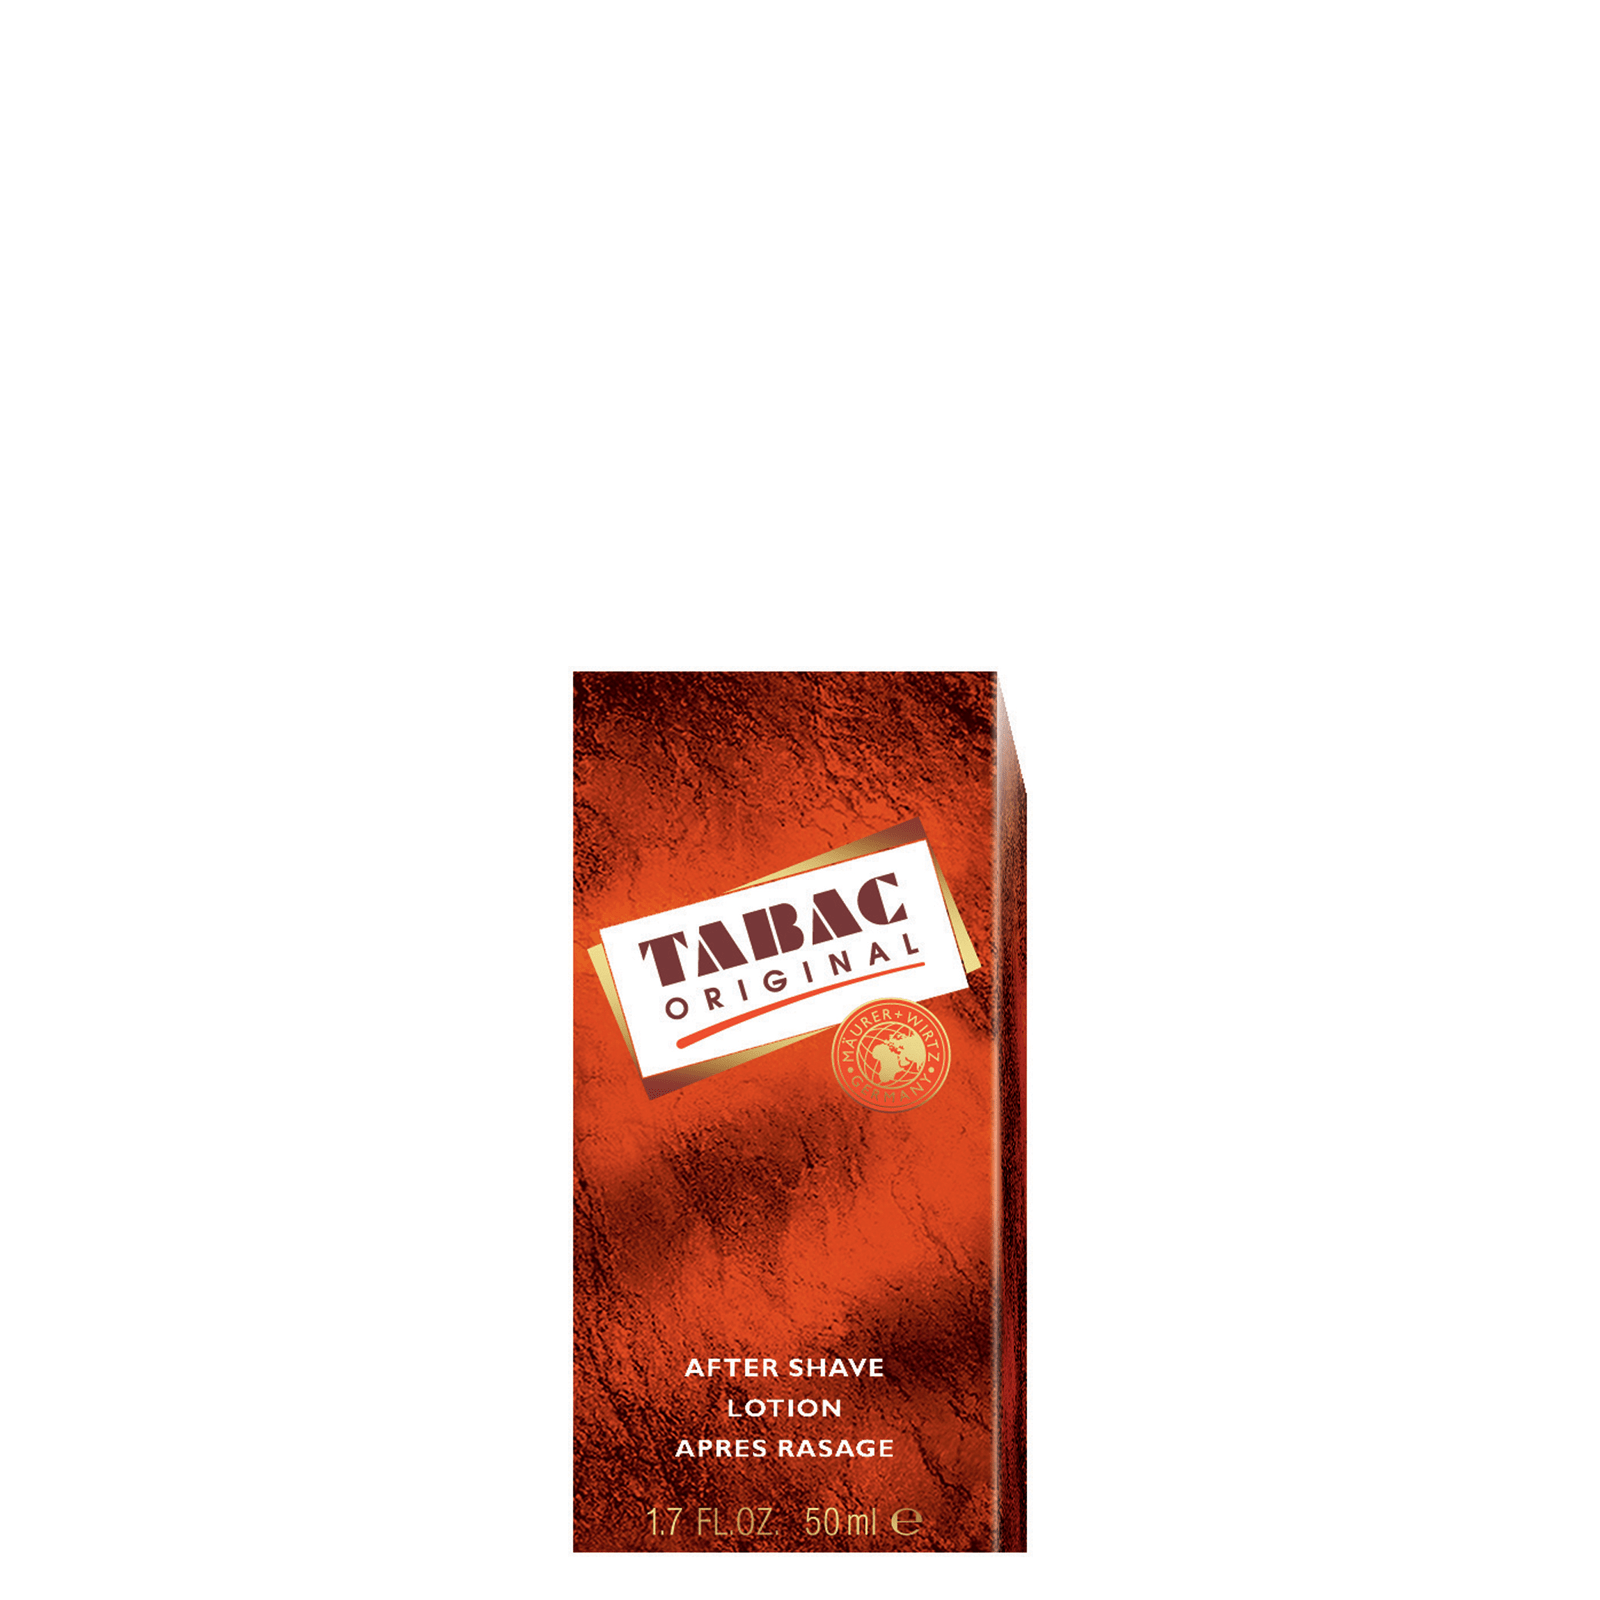 Tabac Aftershave Lotion 50ml